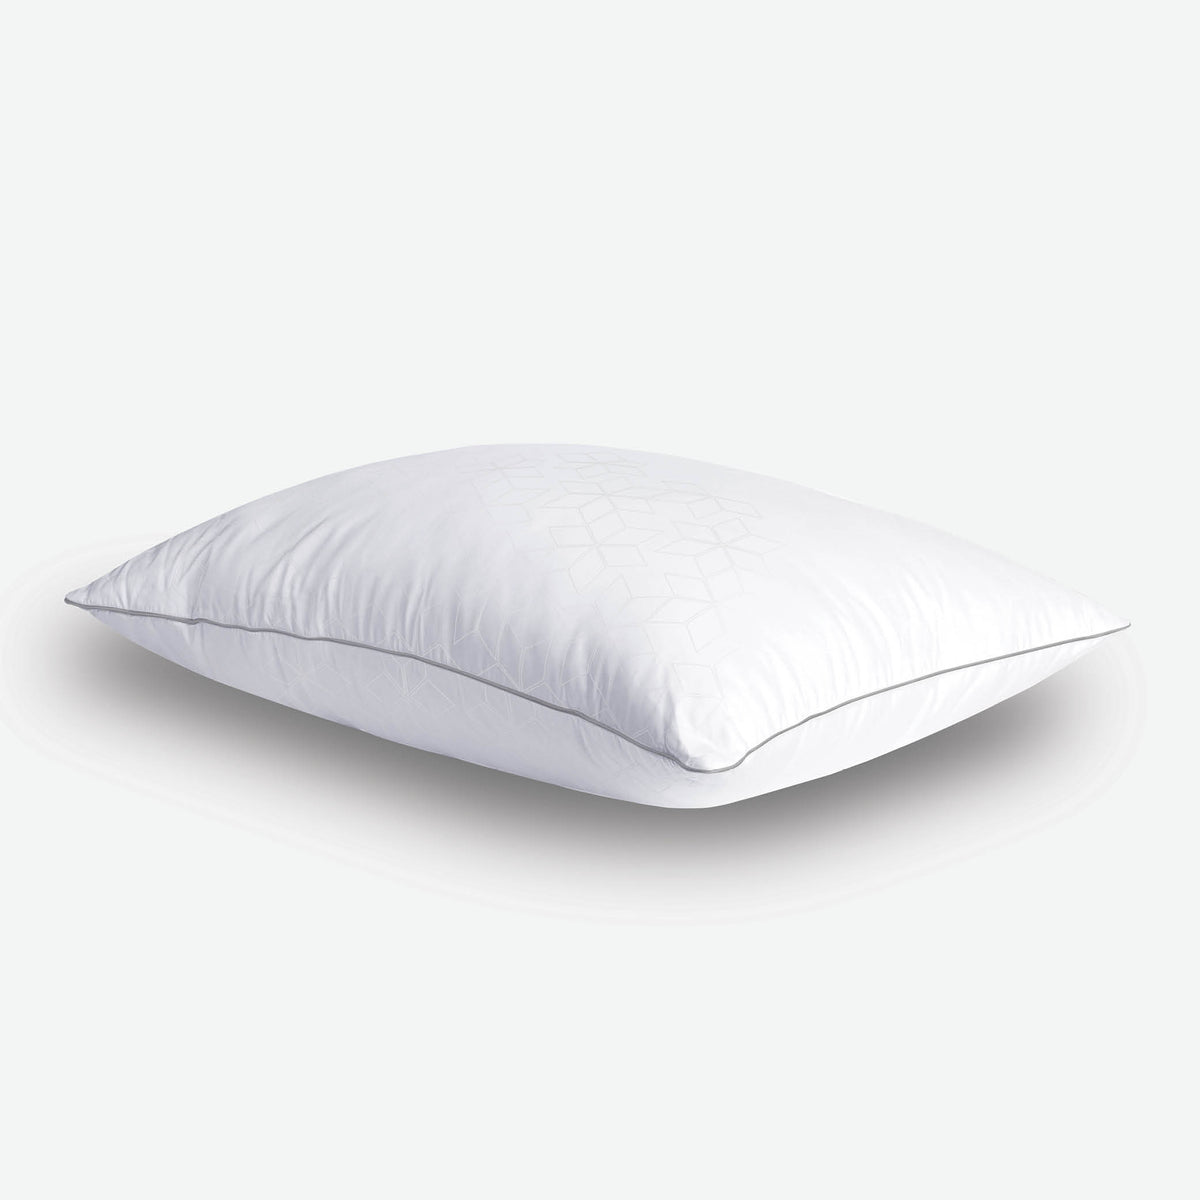 Image of the white Cooling Shattered Ice Pillow on a white background